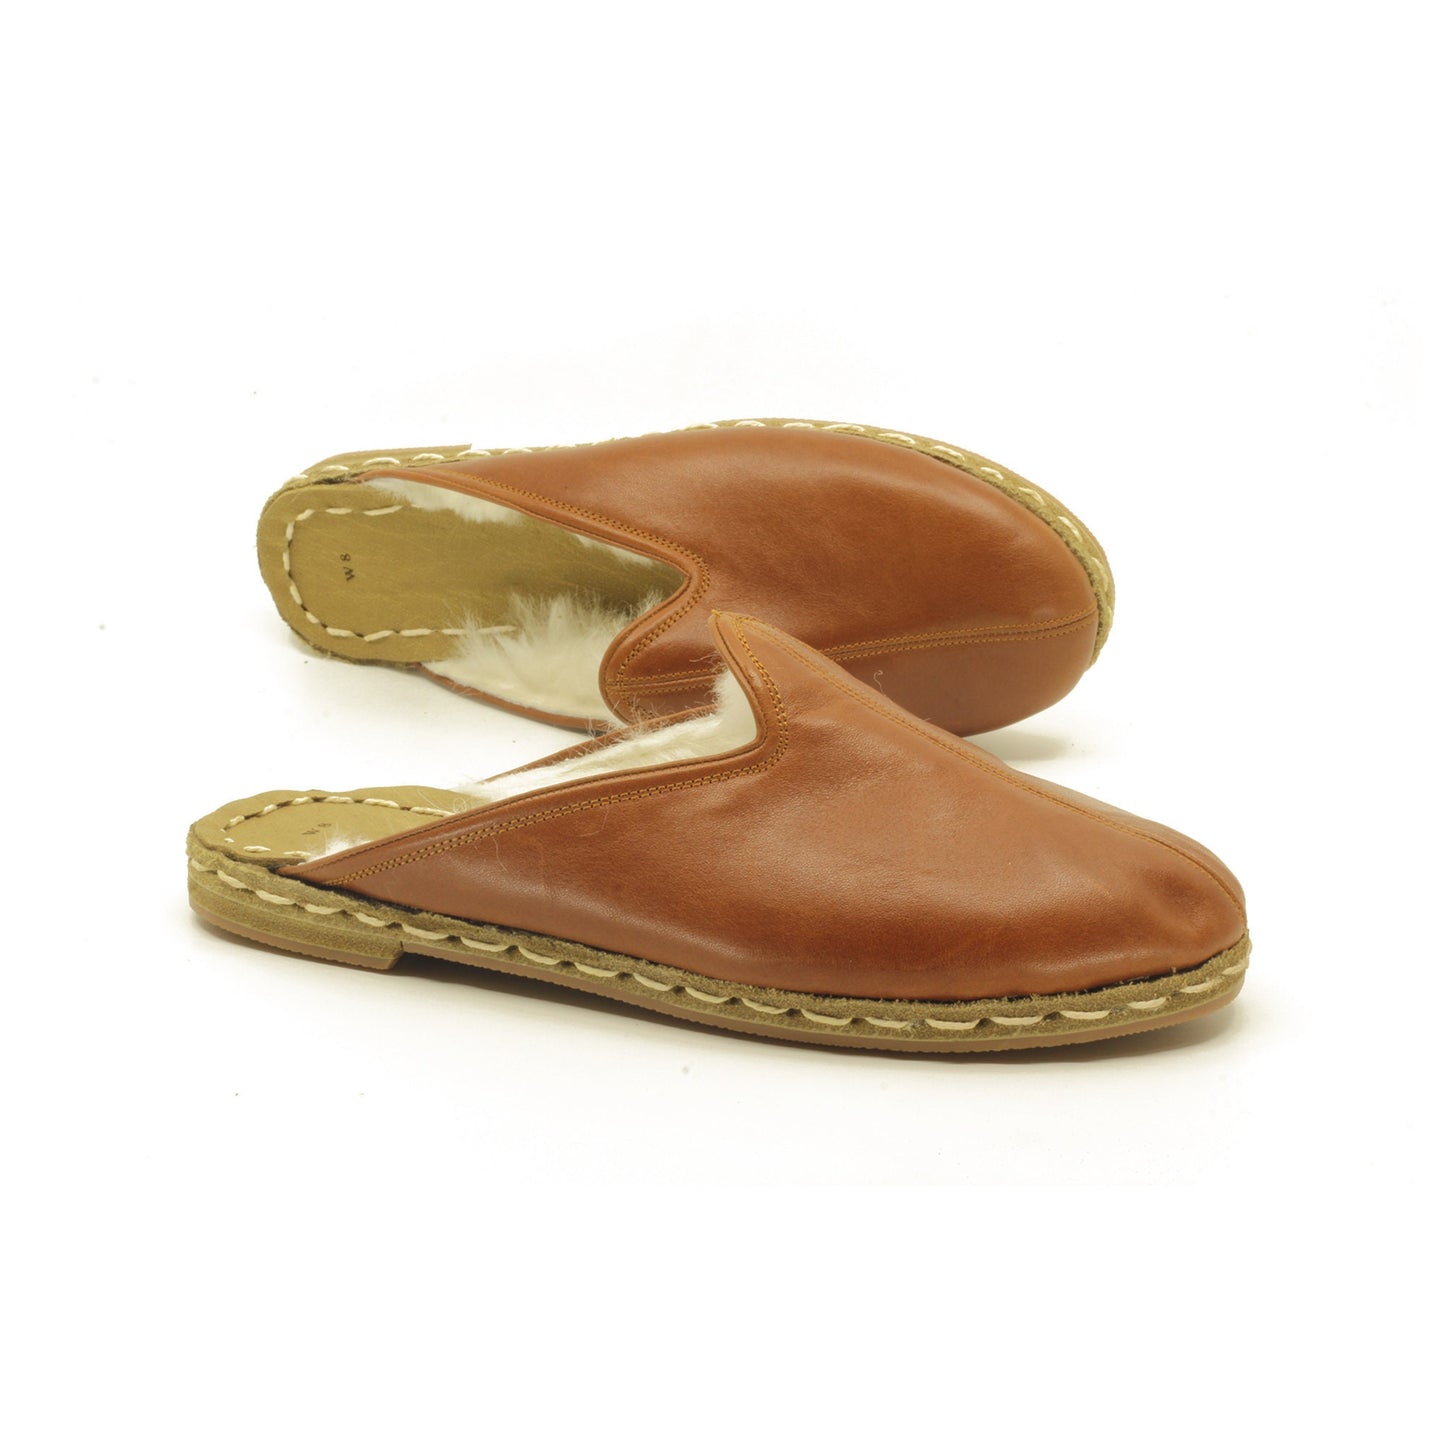 Winter Slippers  - Sheepskin slippers  - Close Toed Slippers - Antique Brown Leather – Rubber Sole - For Women